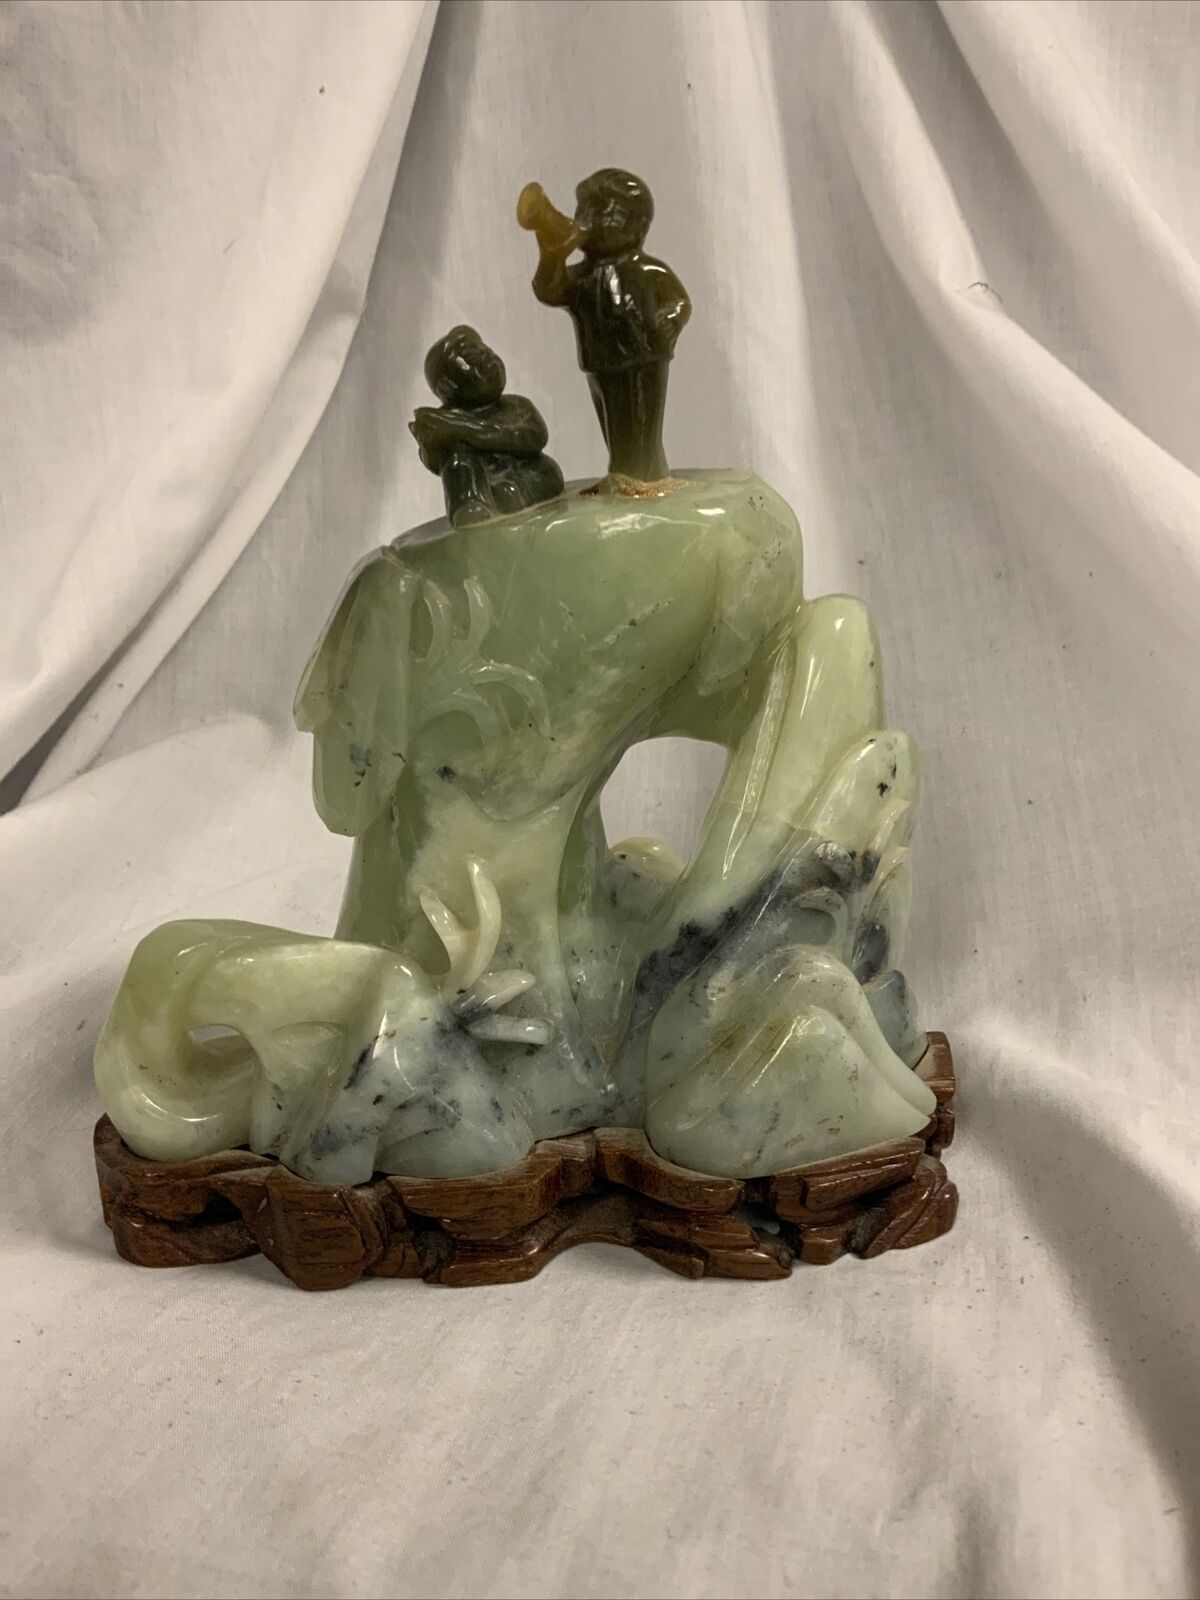 Vintage Chinese Carved Jade Landscape Boys 7”x7”x3.5” with Wood Carved Base